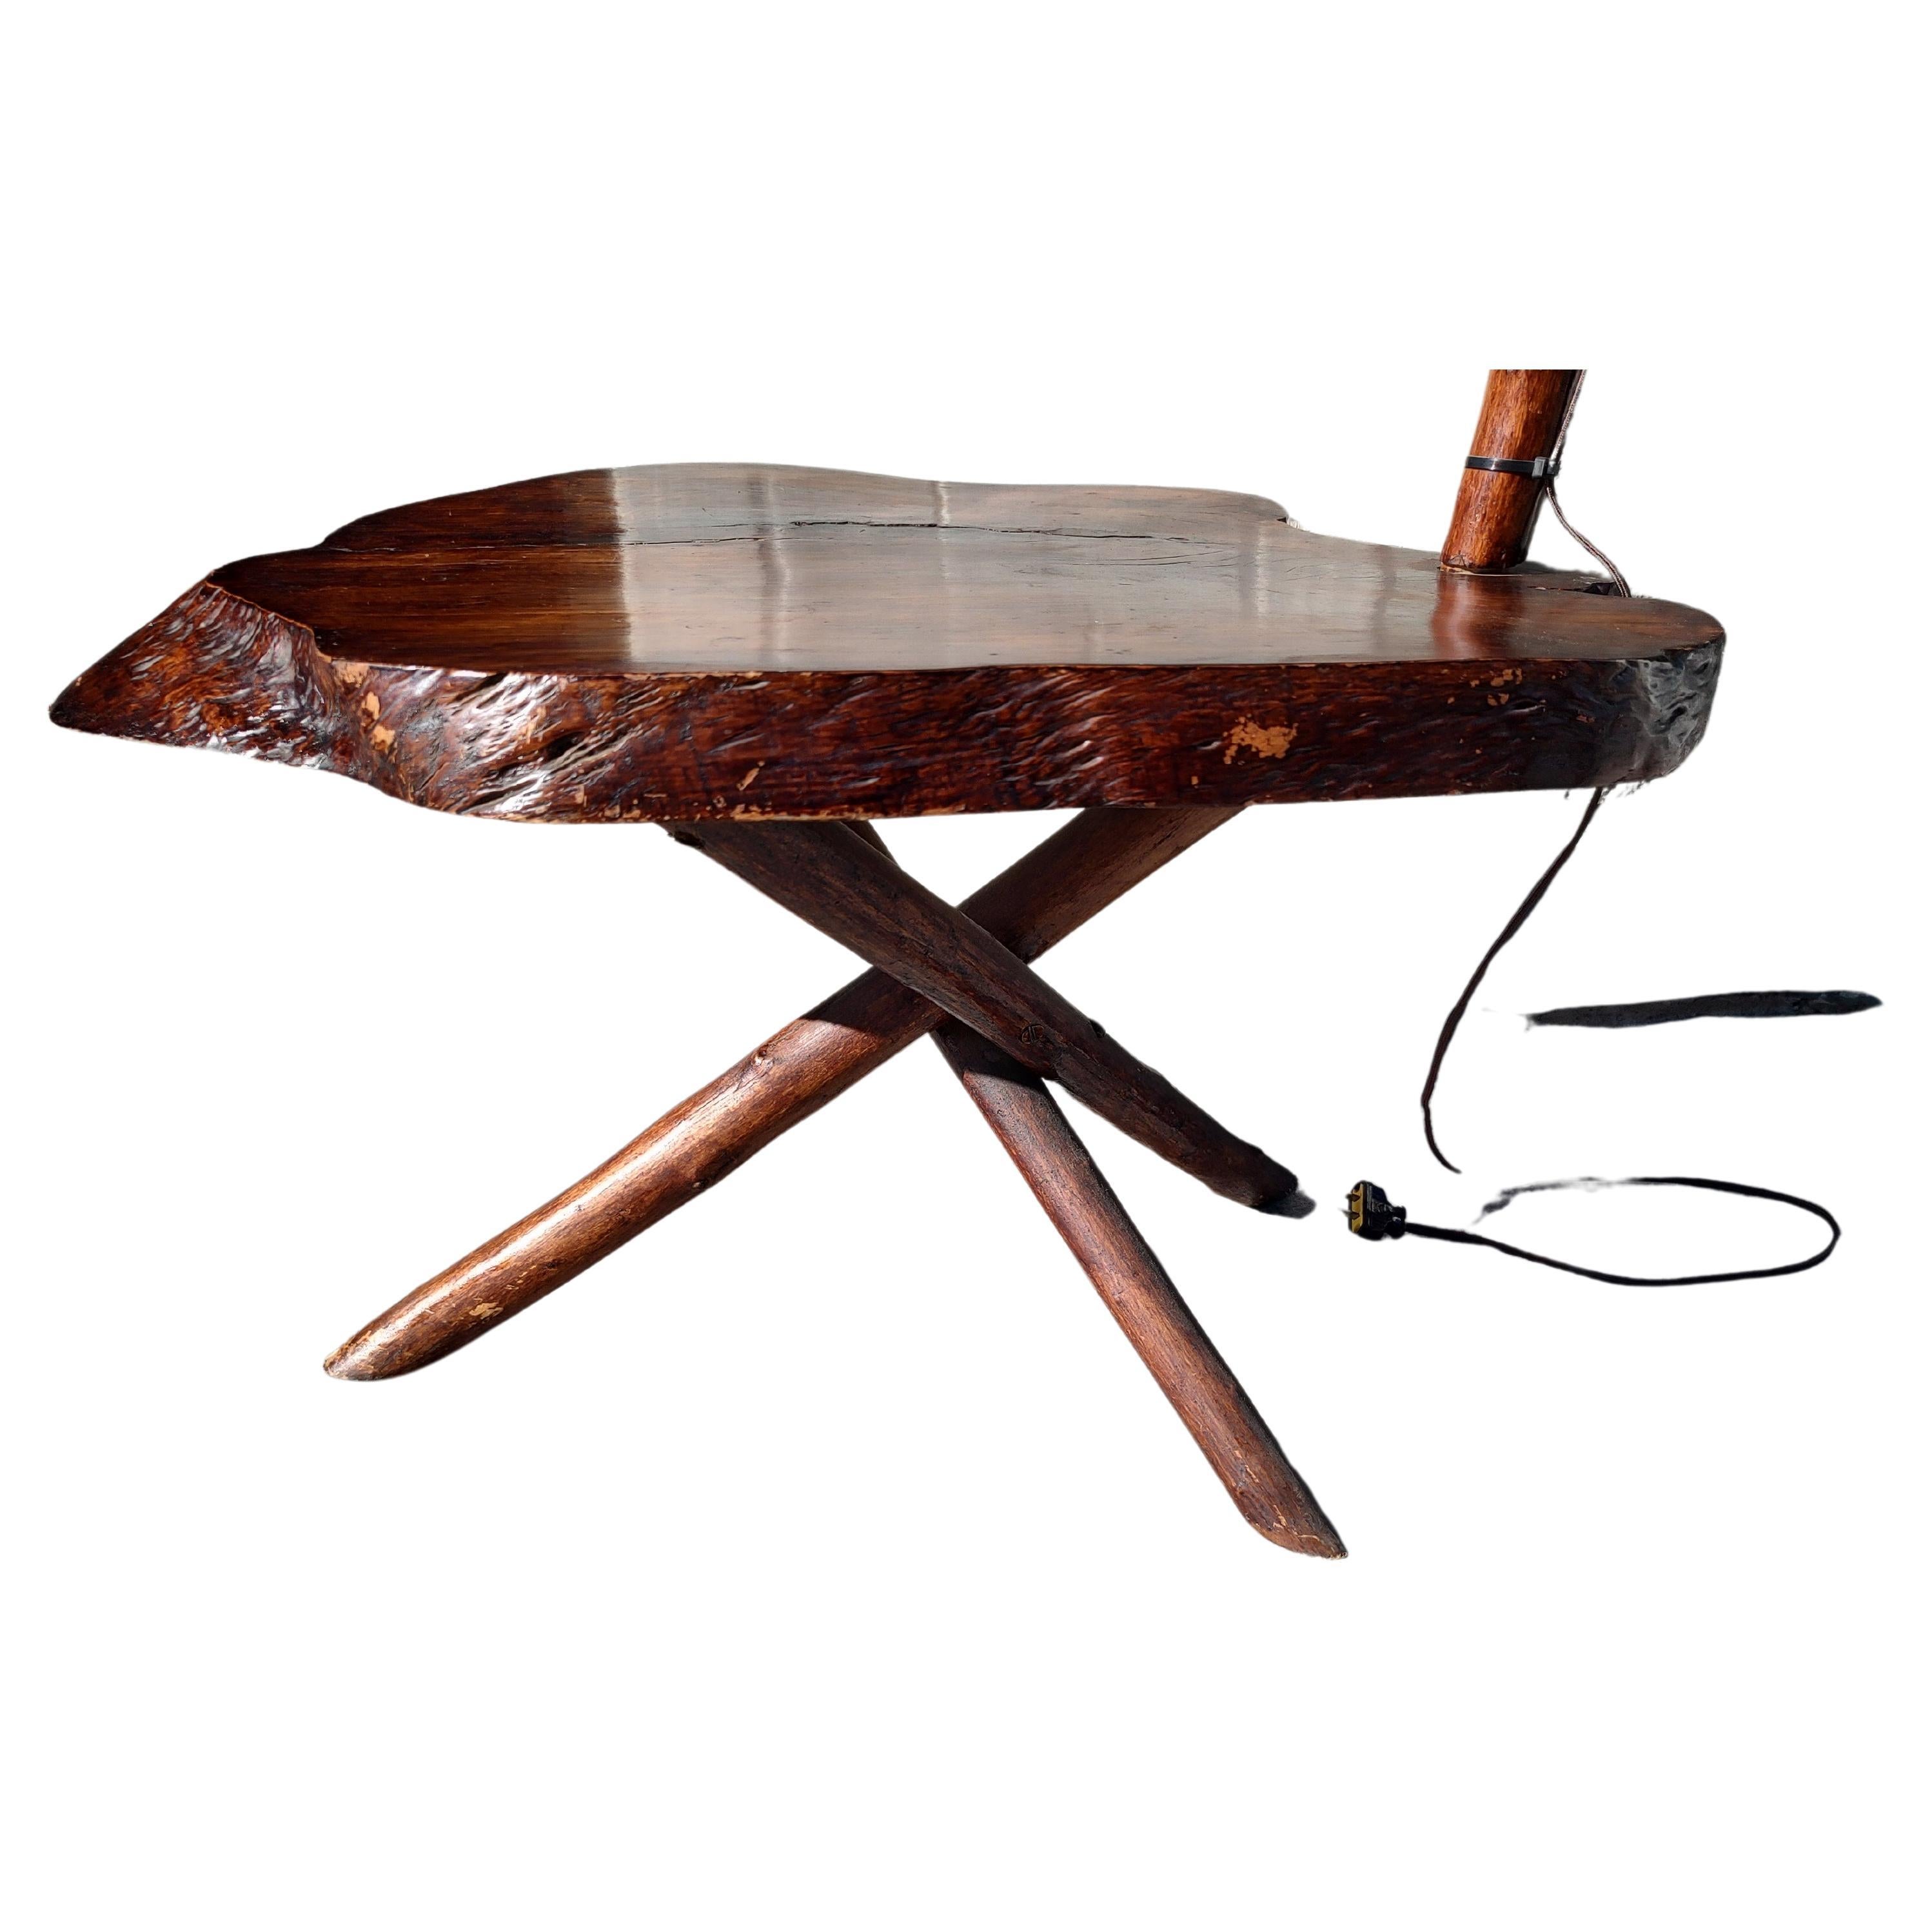 Hand-Crafted Adirondack Bent Twig Floor Lamp with Tri Leg Table Base For Sale